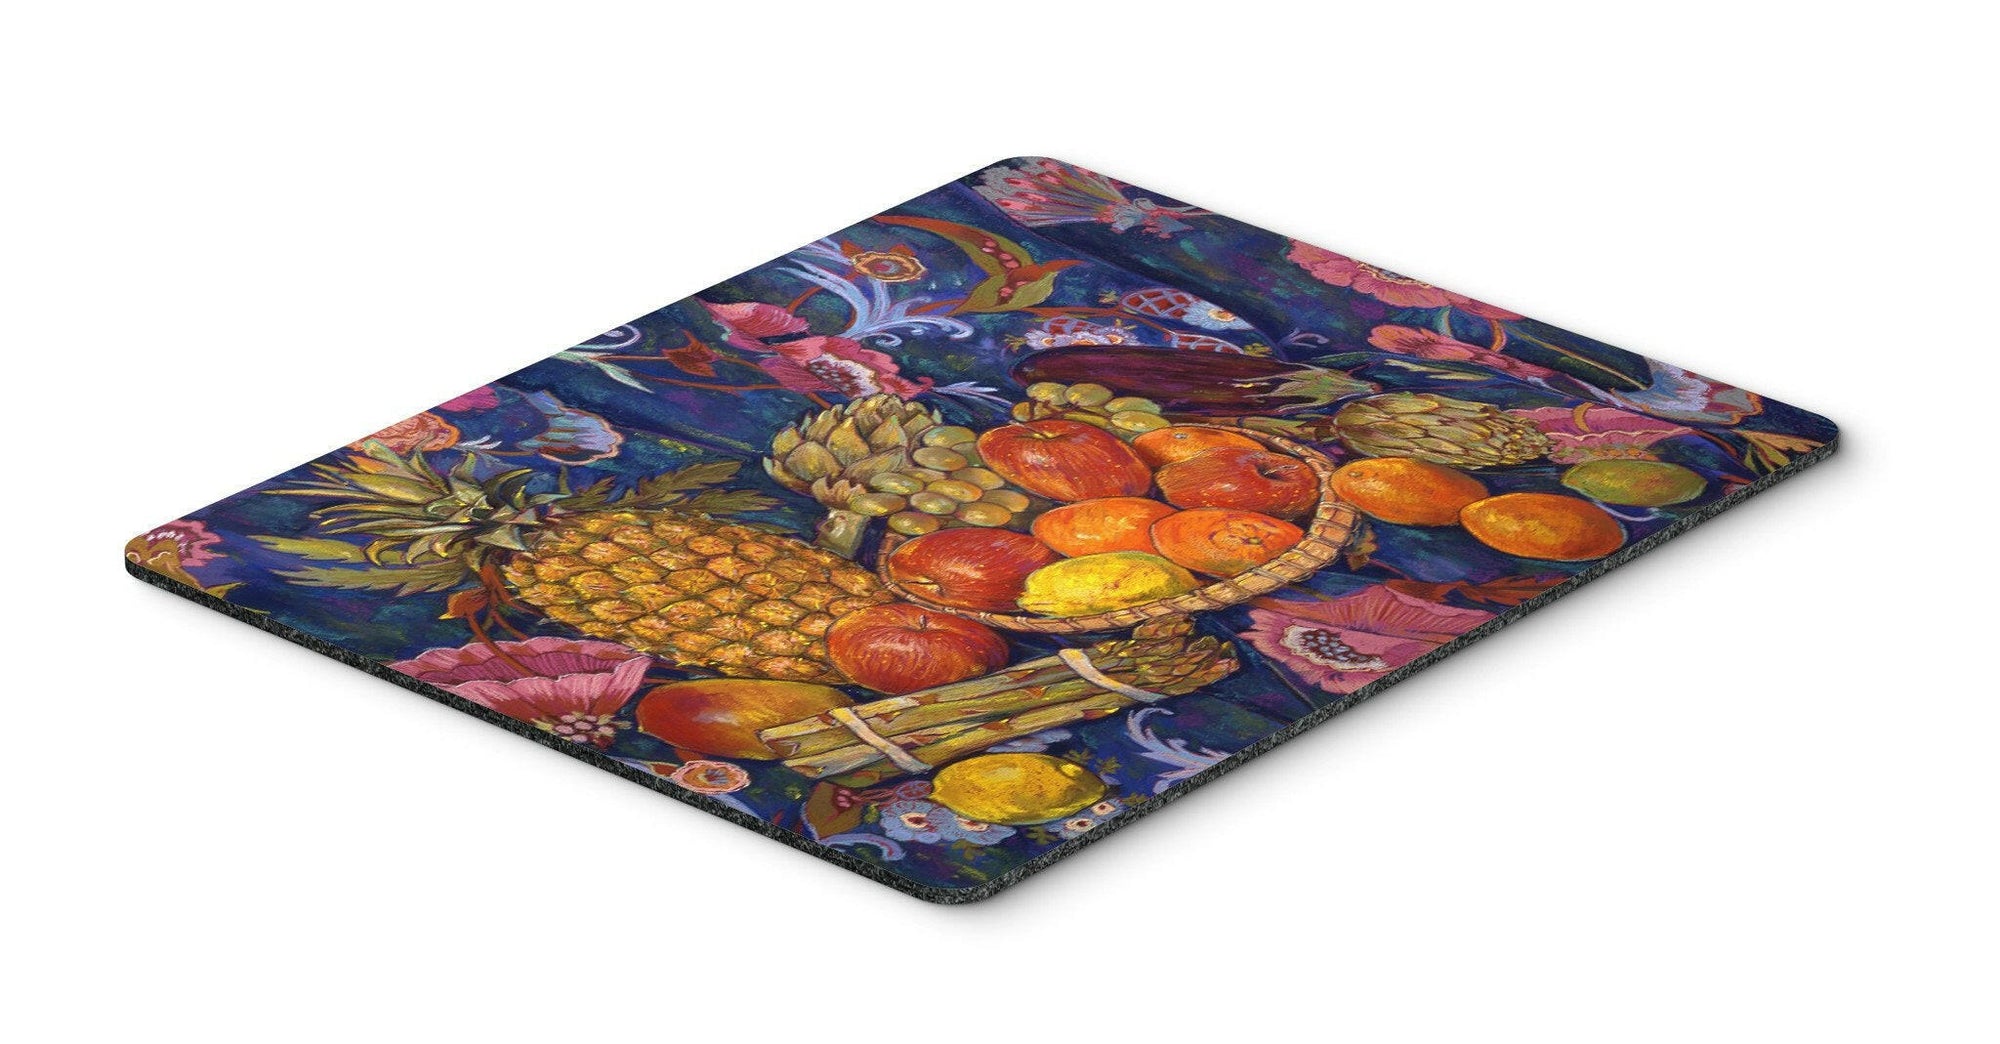 Fruit & Vegetables by Neil Drury Mouse Pad, Hot Pad or Trivet DND0018MP by Caroline's Treasures